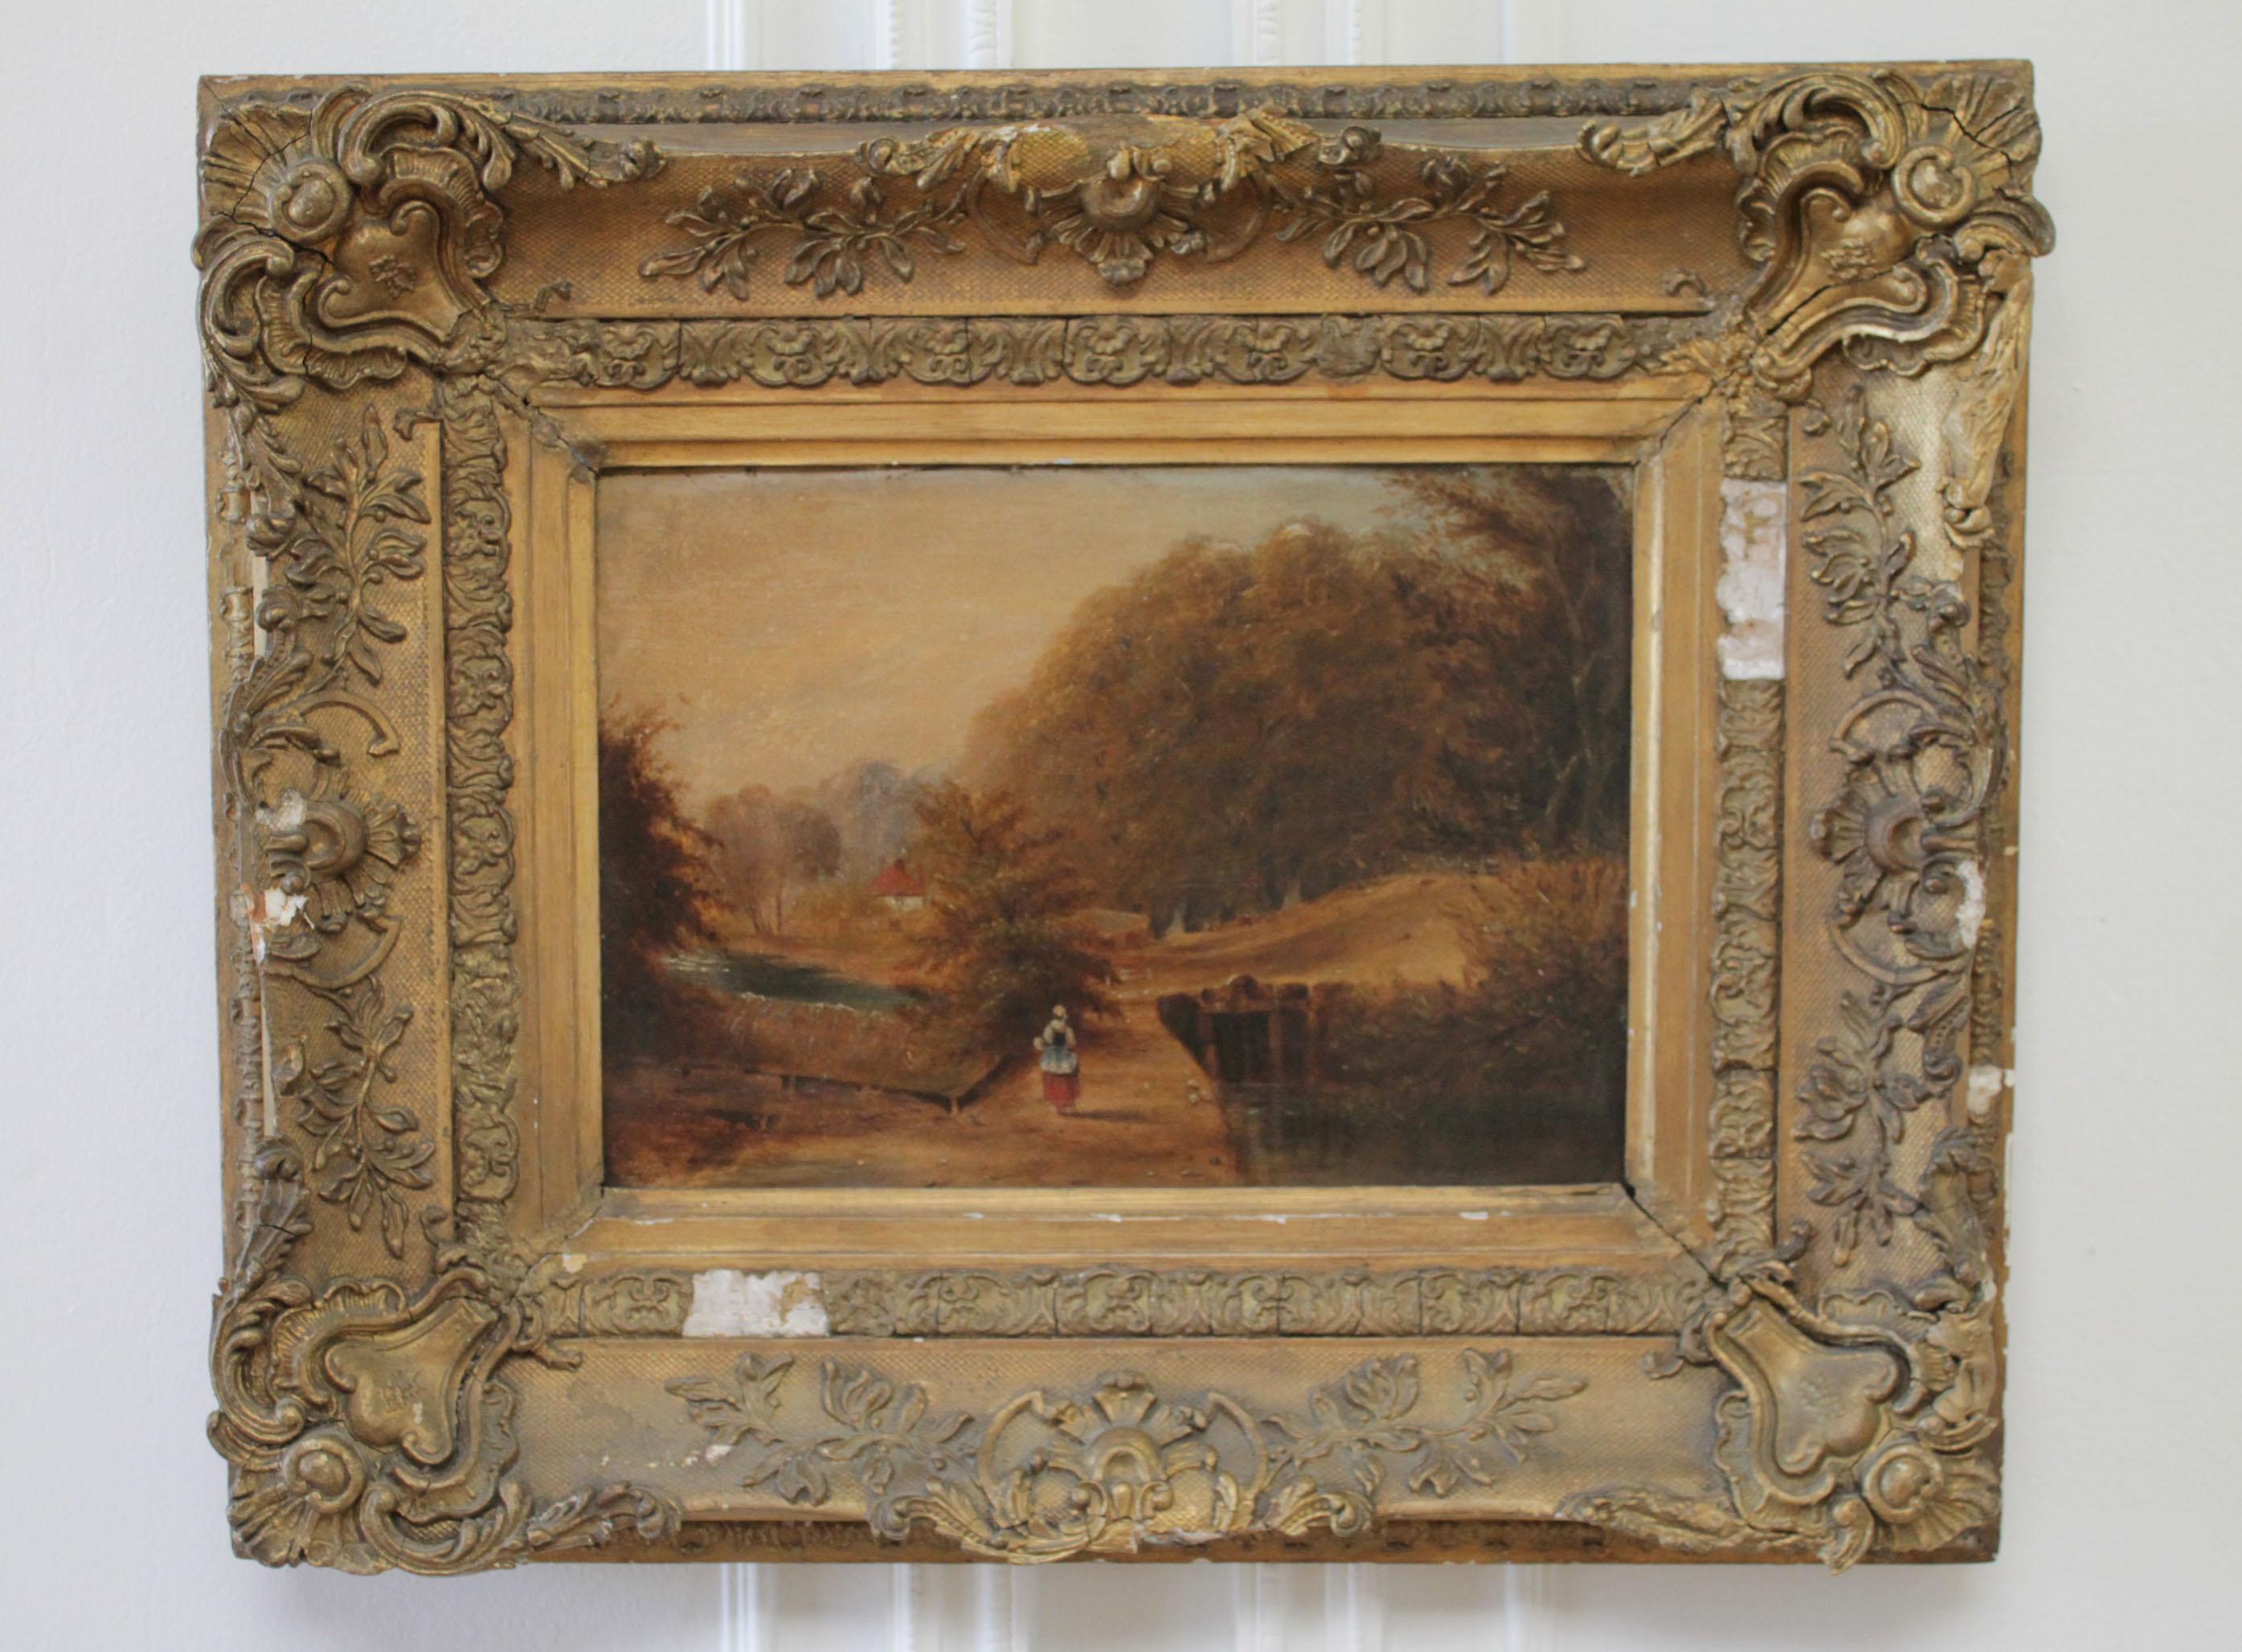 Roberson and Miller oil on canvas
Woman walking in the fields,
circa 1835-1838.
In original giltwood frame with minor loses.
   